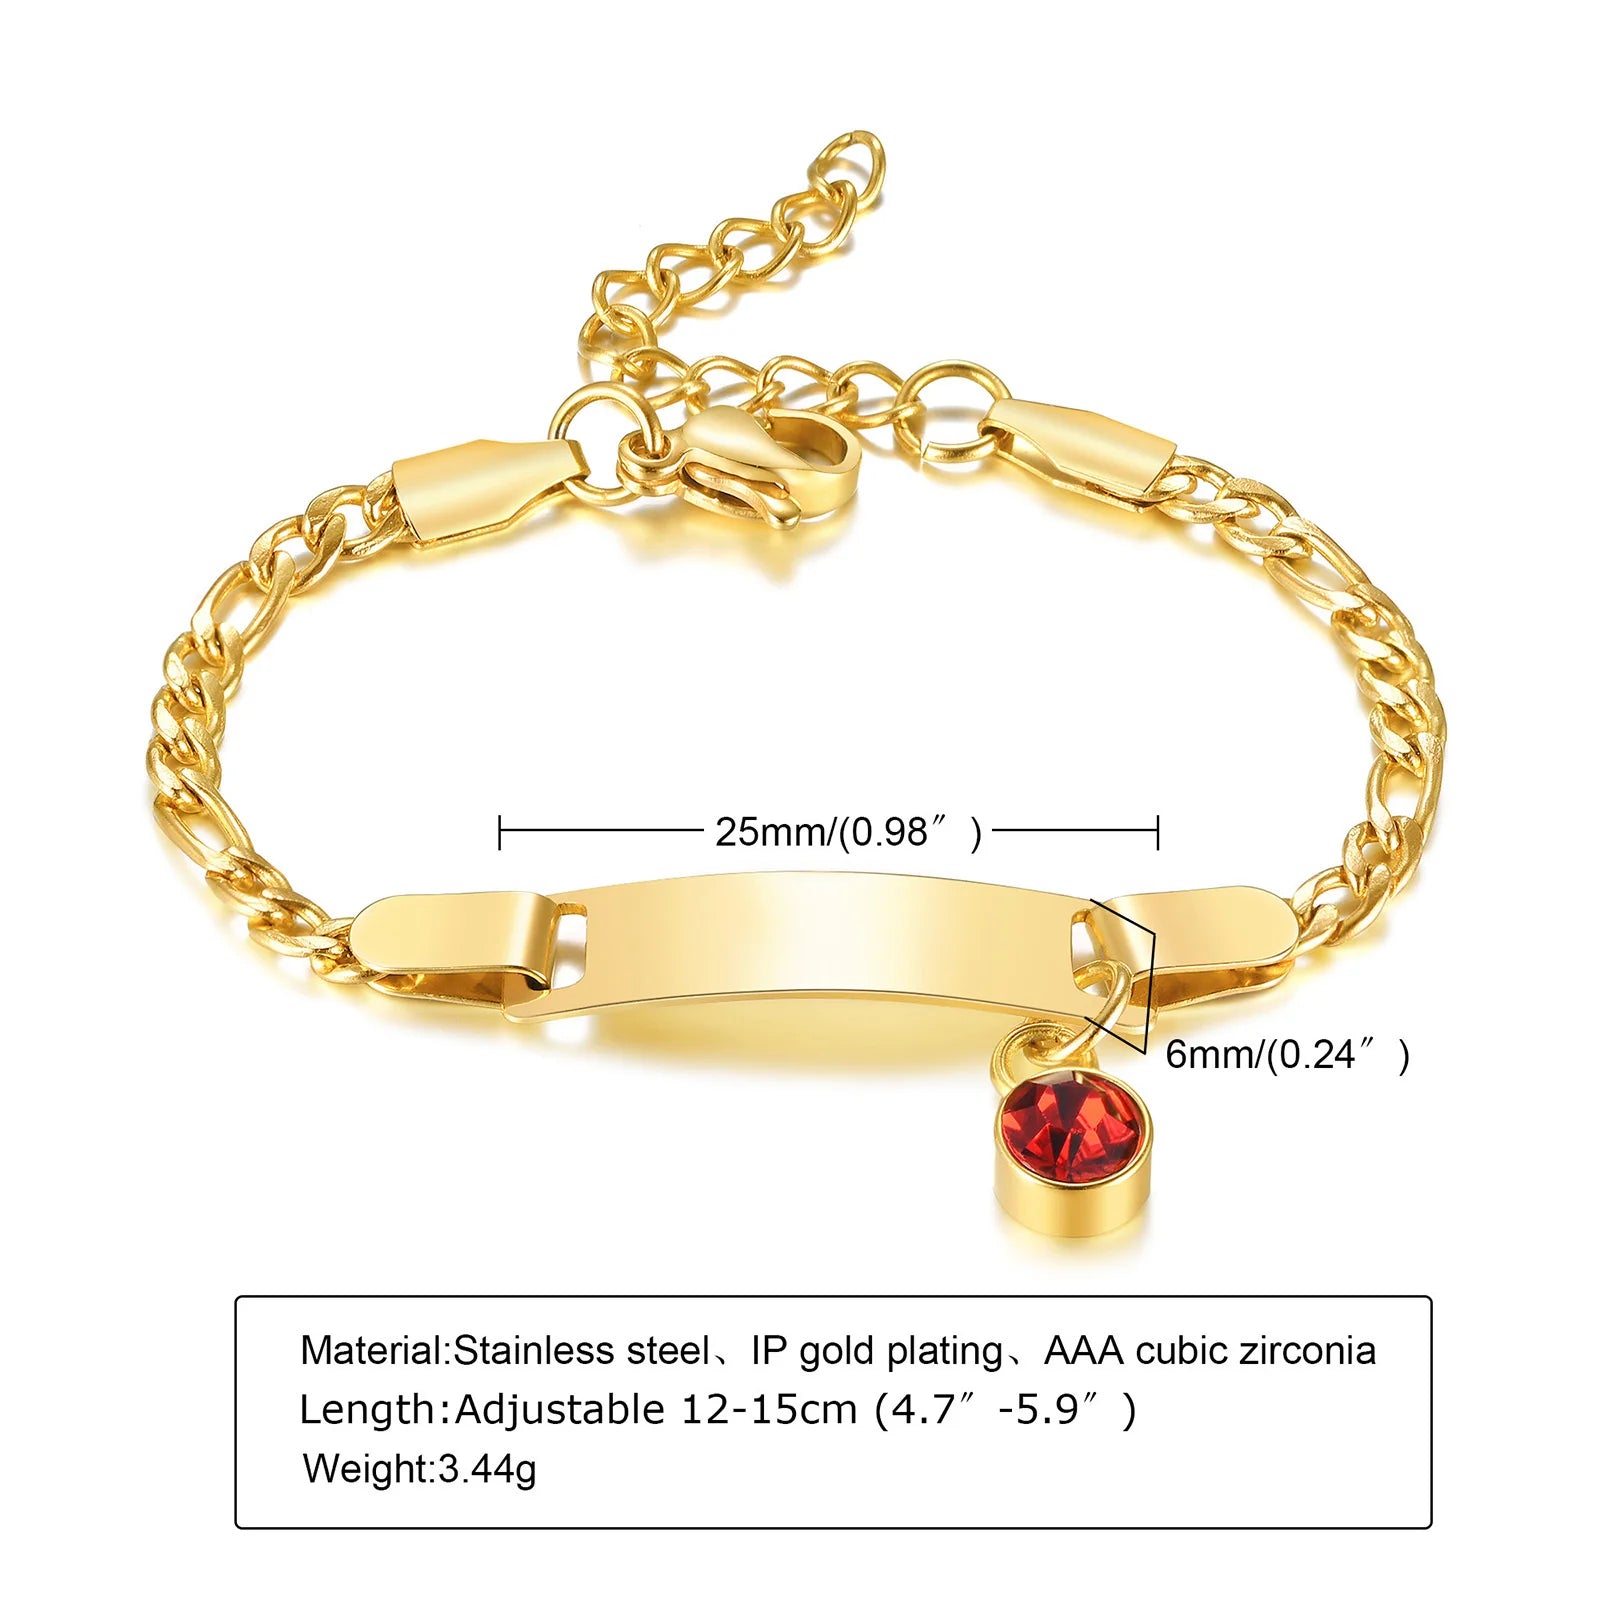 Celebrate Milestones: Engravable Link Chain Bracelet with Name Birth Date Plate!